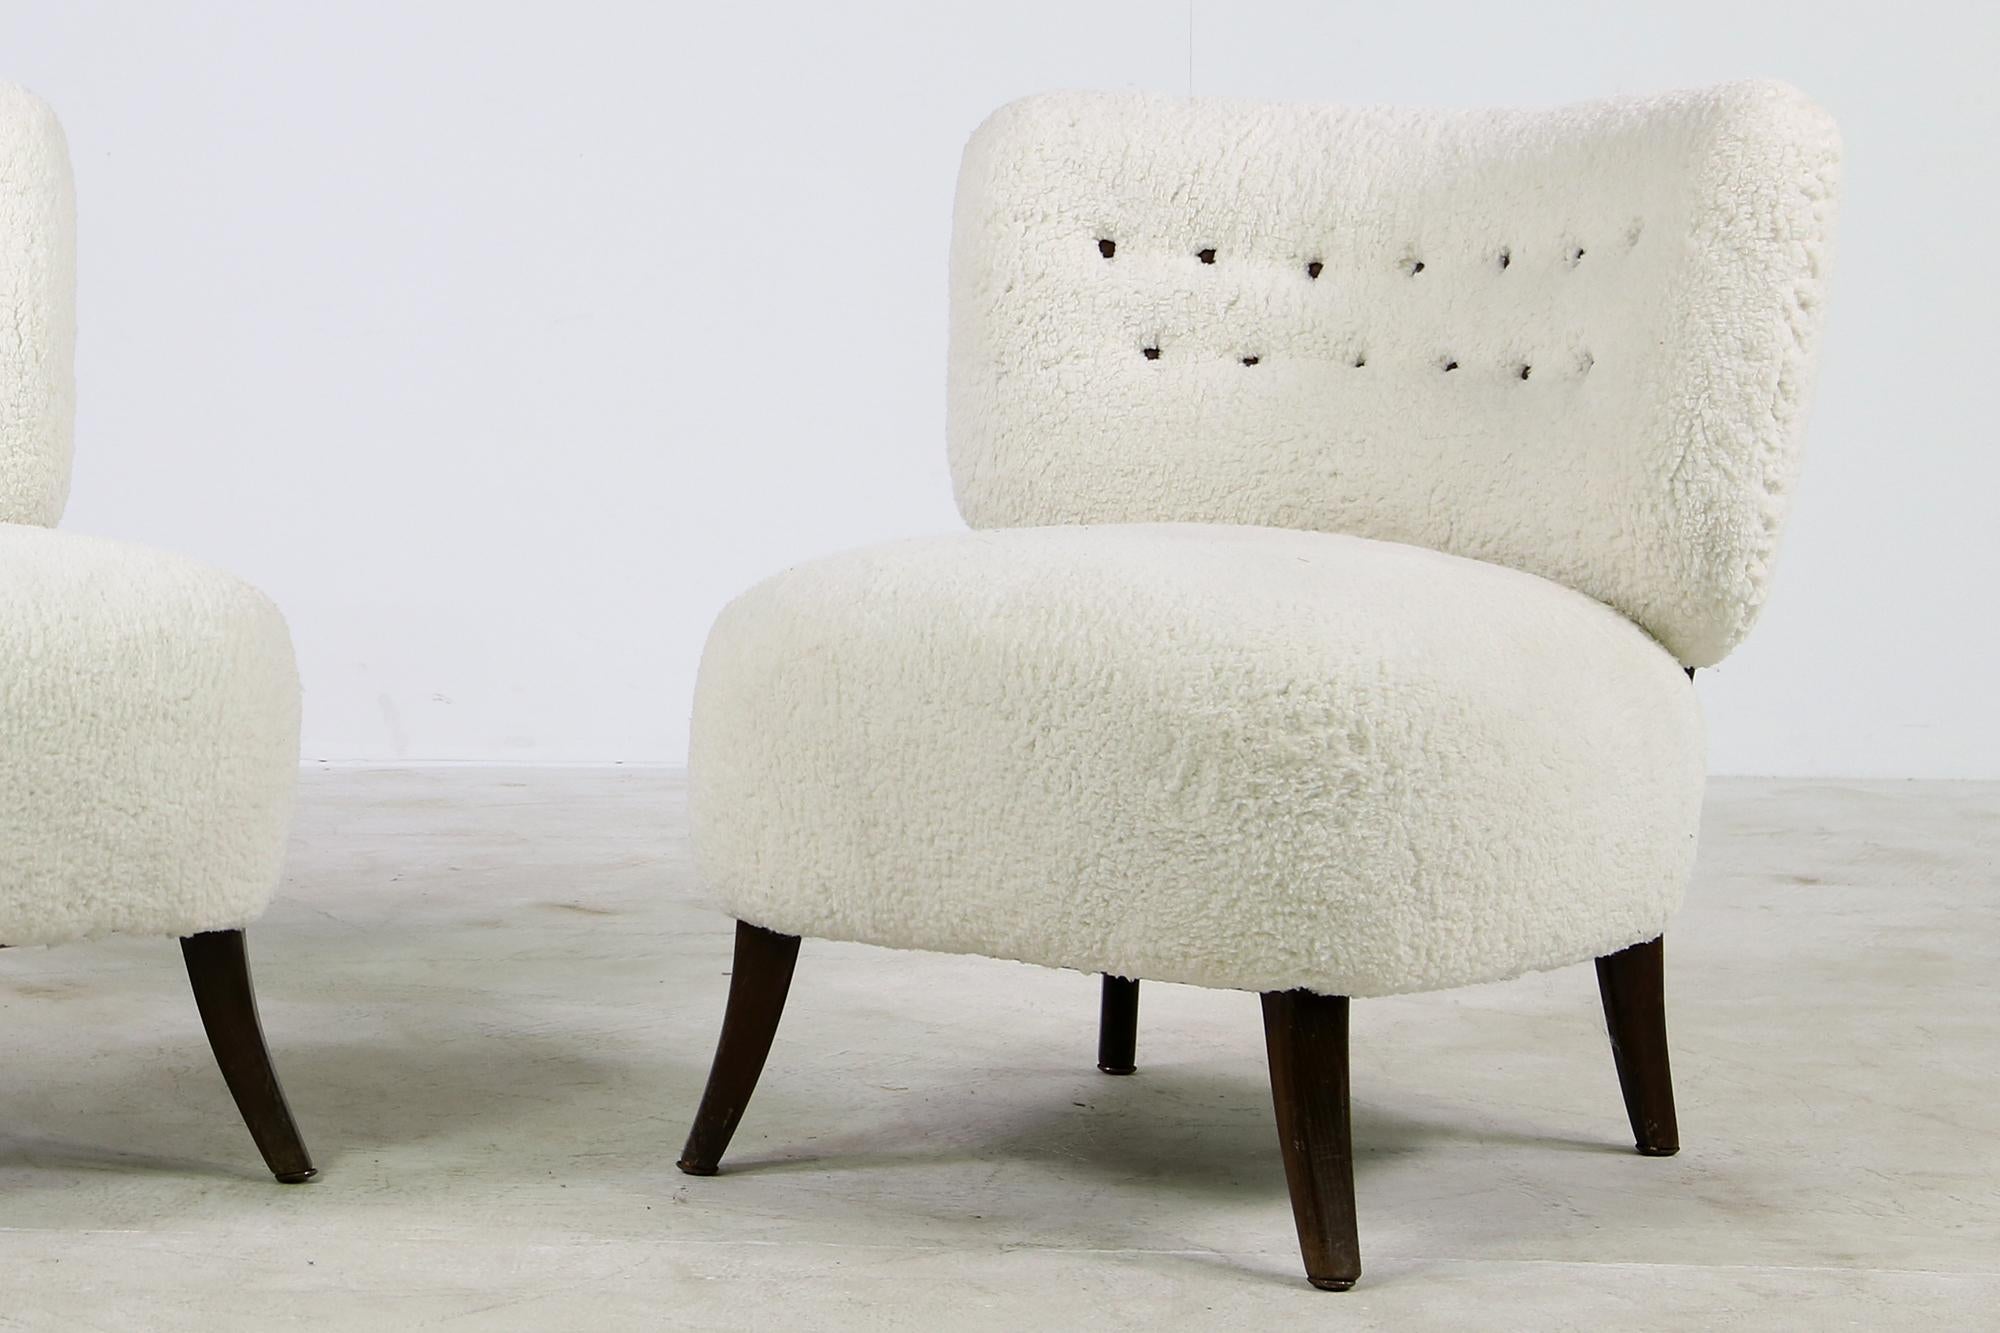 Beautiful and very rare 1950s pair of organic lounge chairs design attrib. to Otto Schultz, made in Sweden circa 1950 with new upholstery and covered with new super soft teddy fur fabric, like sheepskin, but a cotton mix fabric, very soft to the